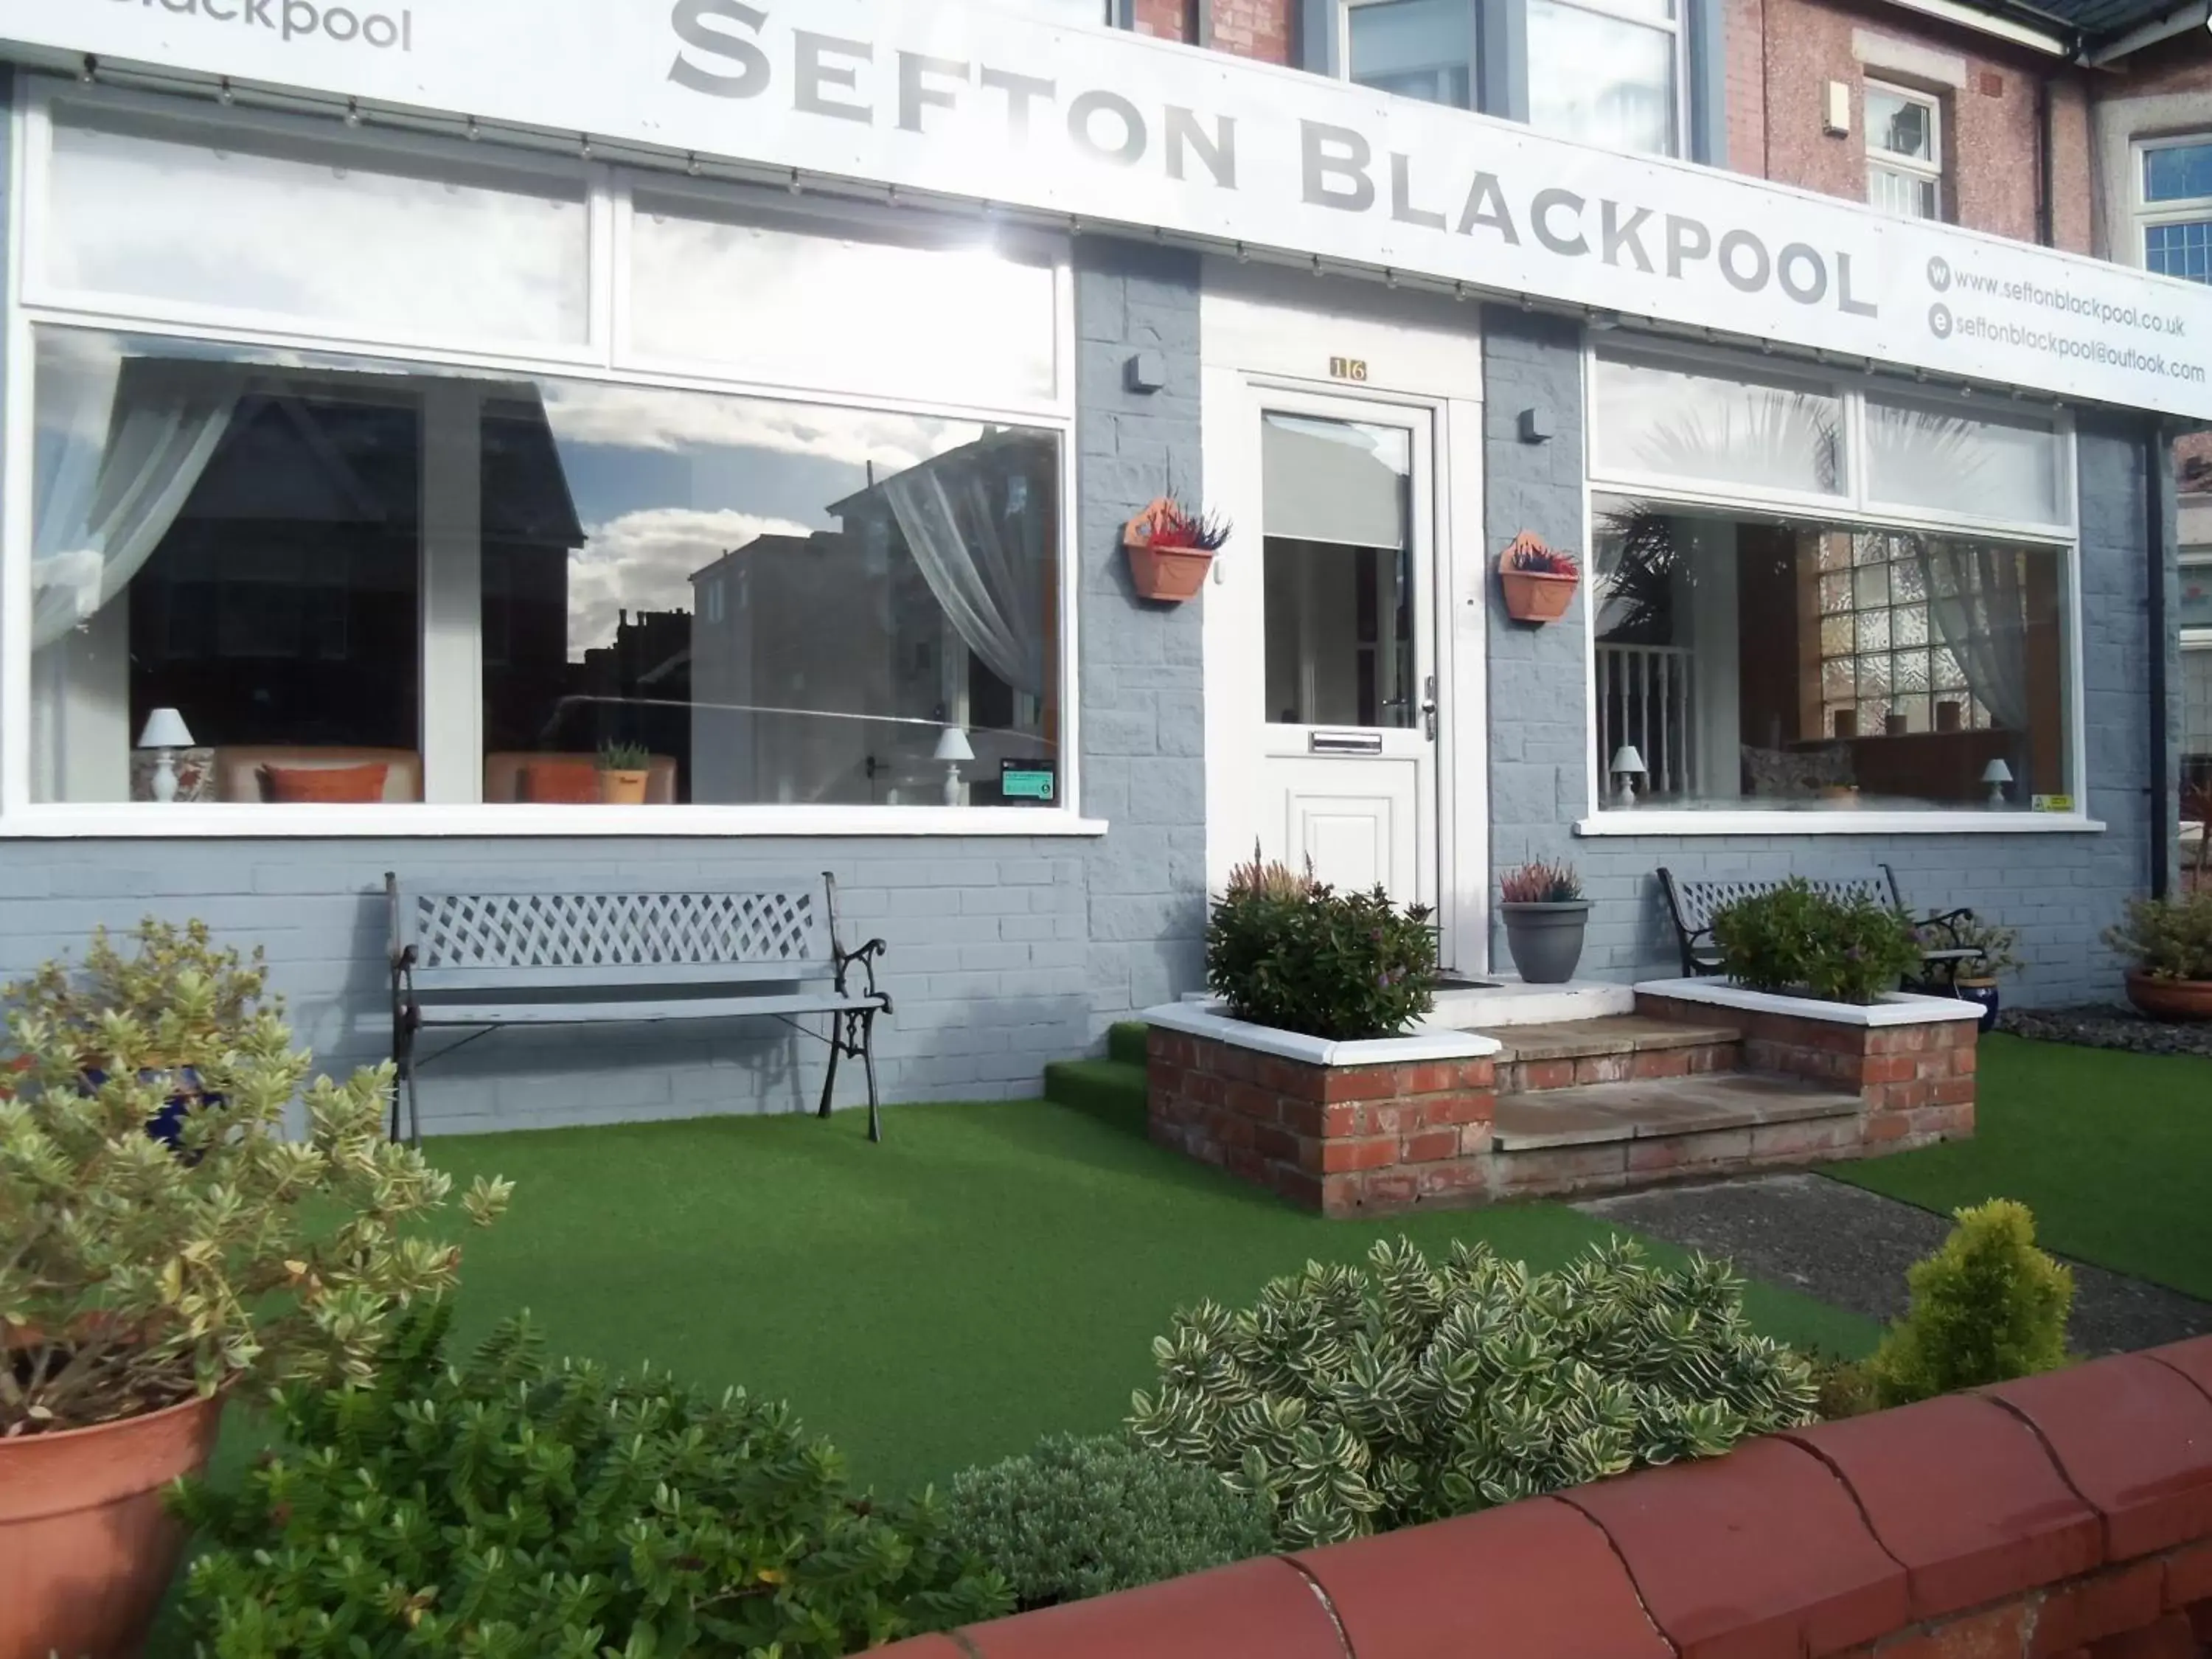 Property building in The Sefton Blackpool